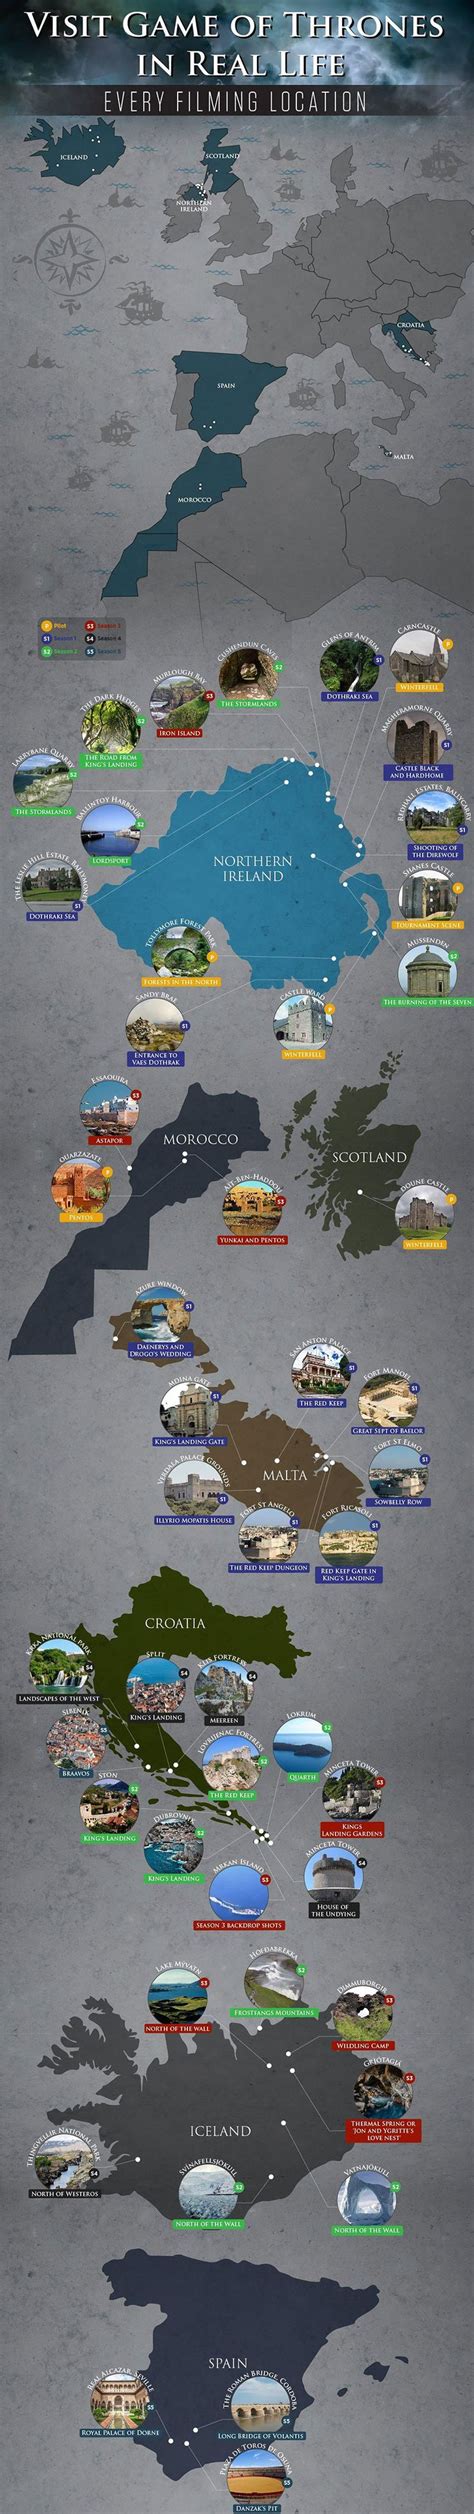 This Infographic By Travel Agency Lawrence Of Morocco Reveals The True